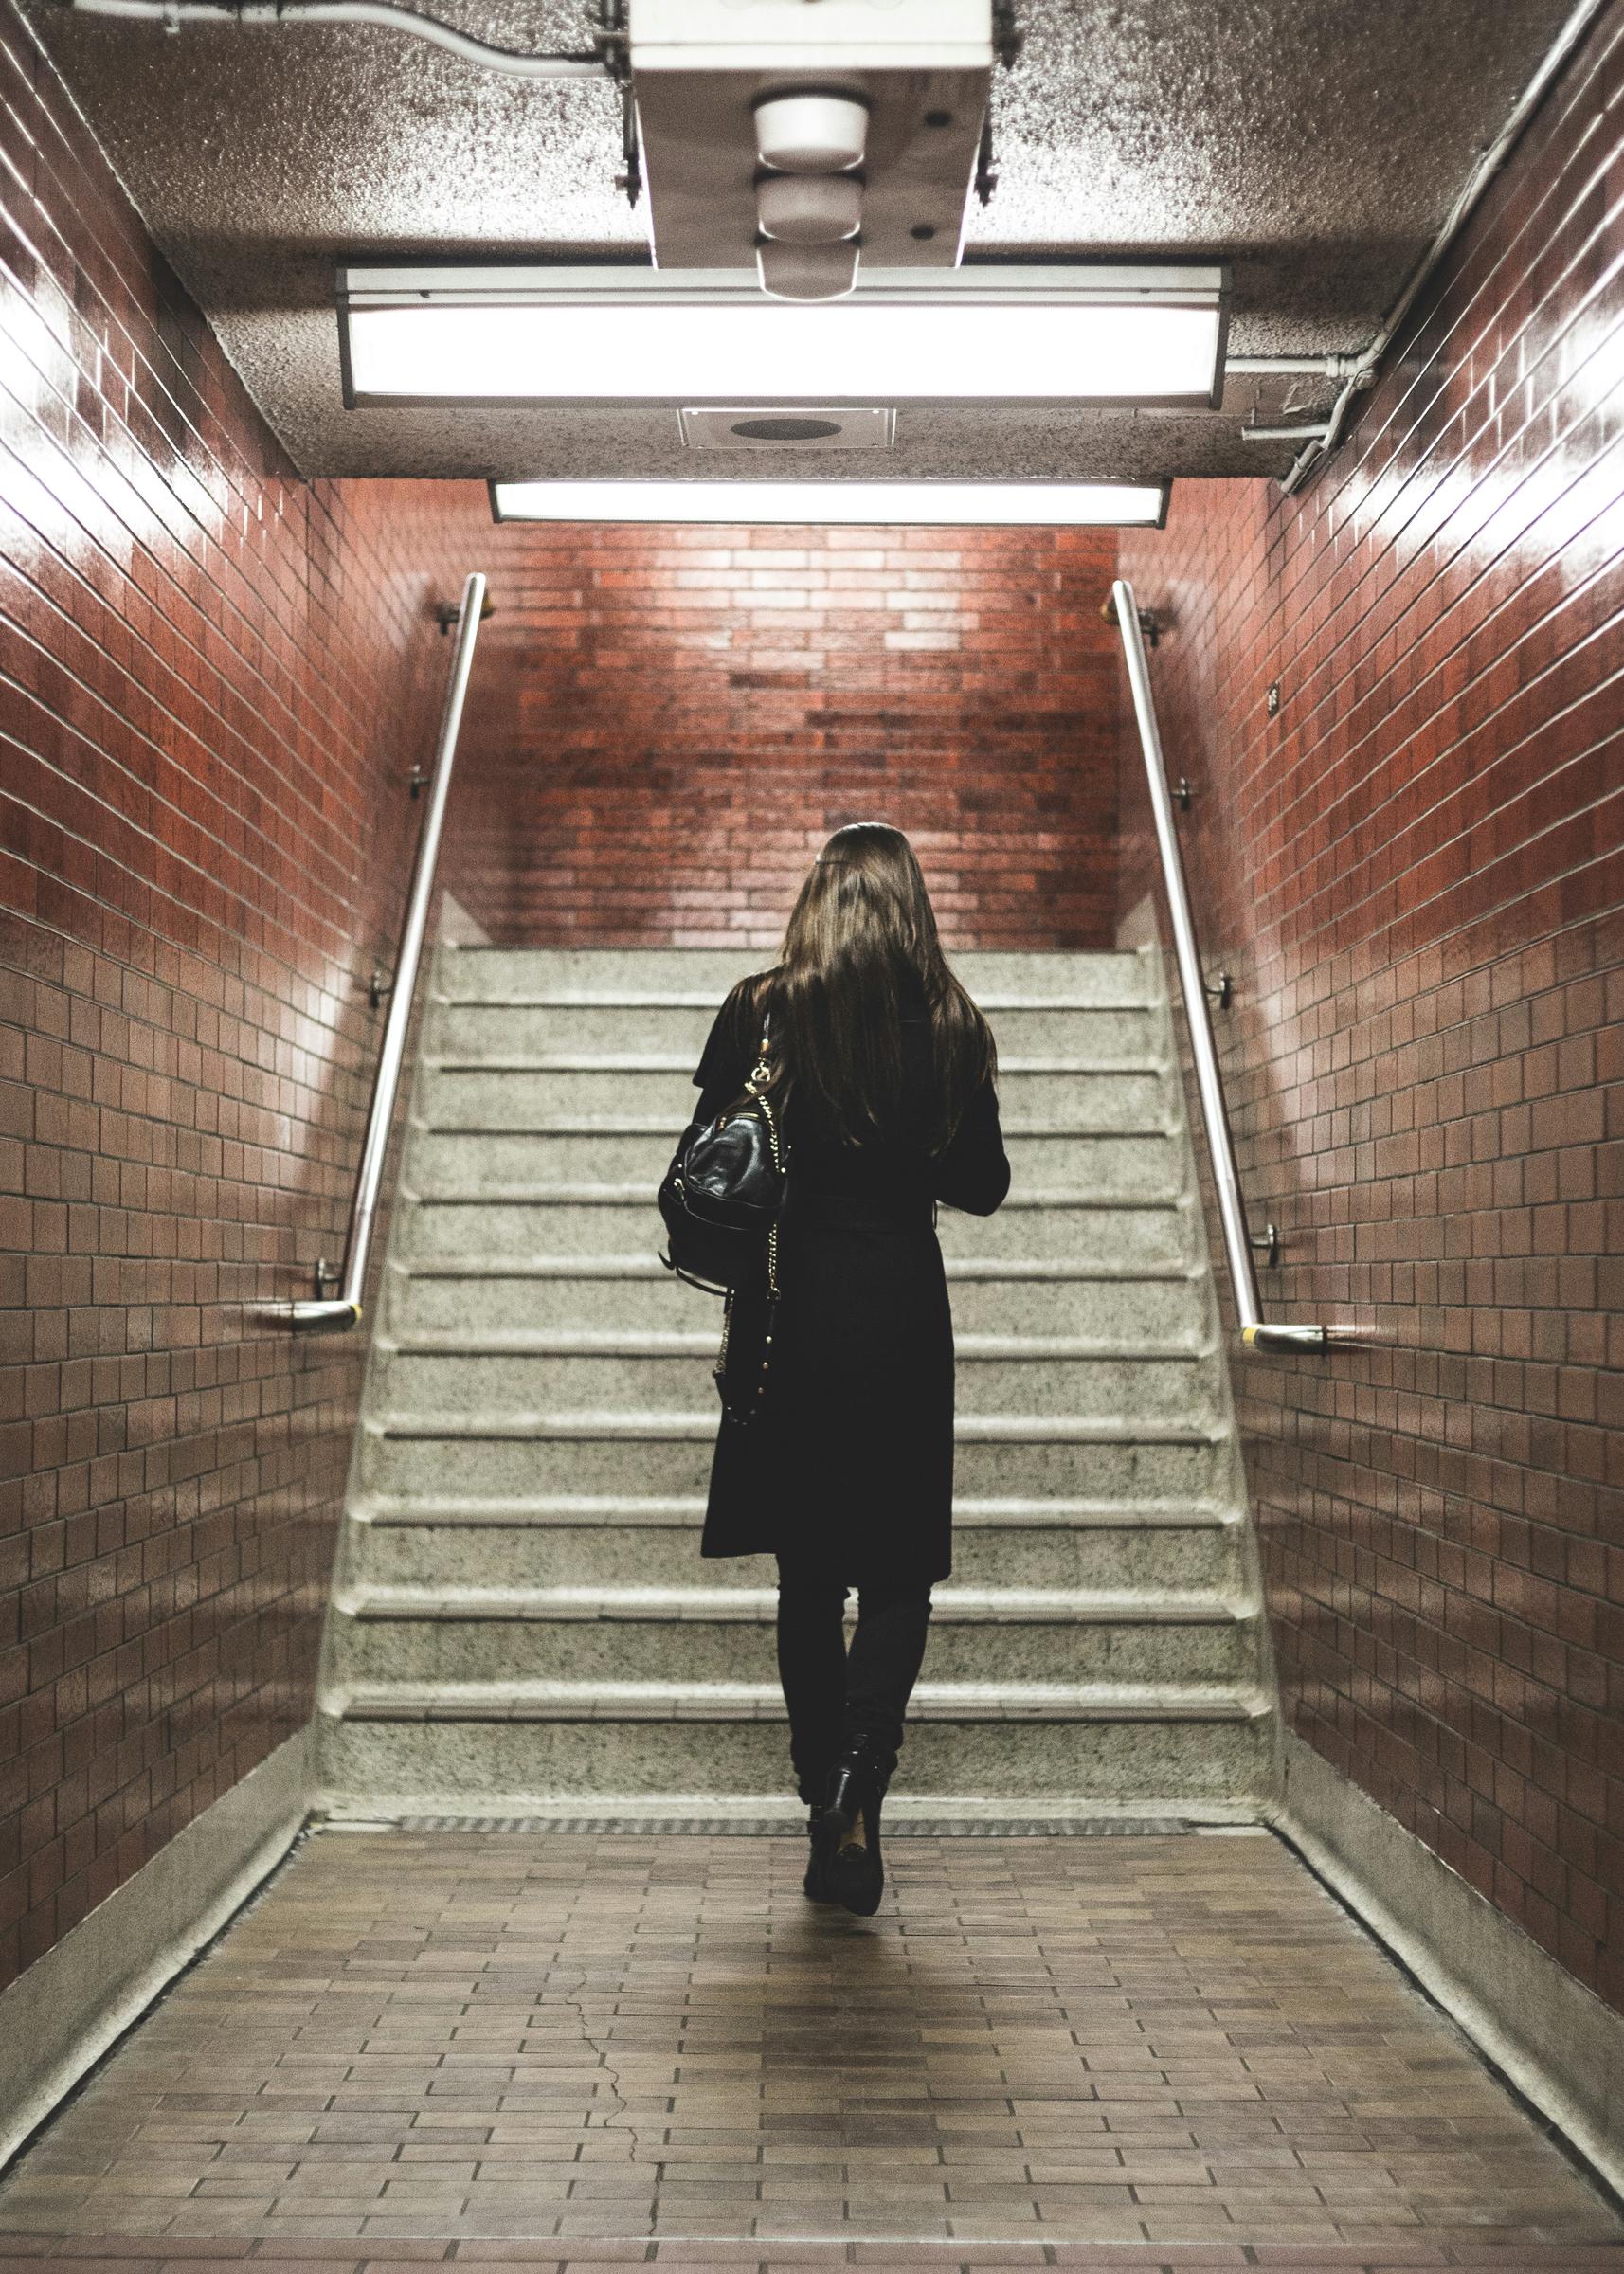 A woman in a subway | Source: Unsplash